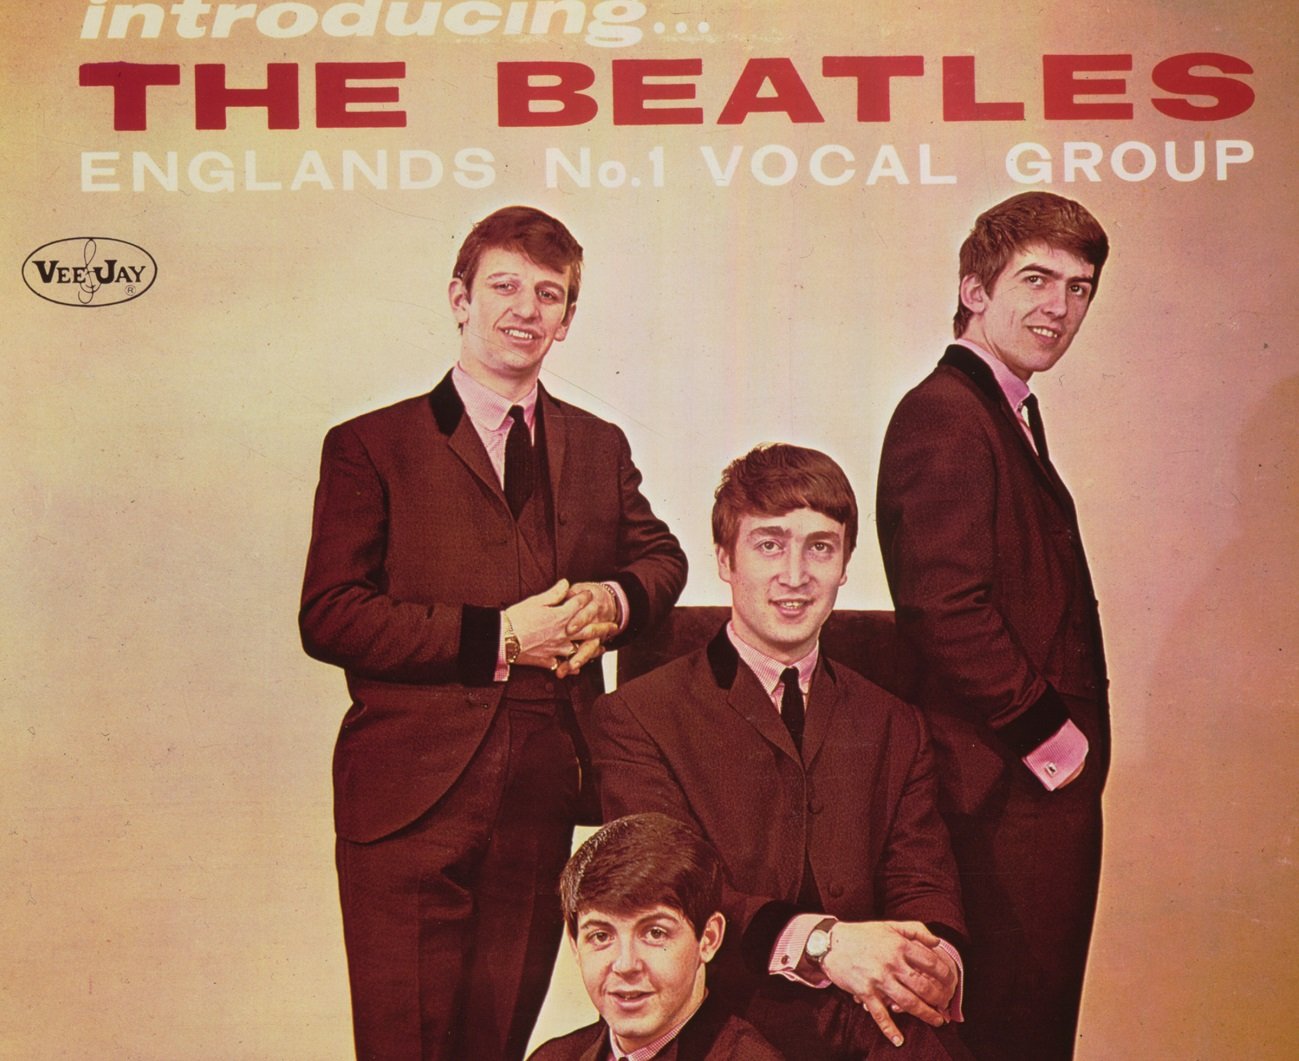 The Beatles on Vee Jay Records